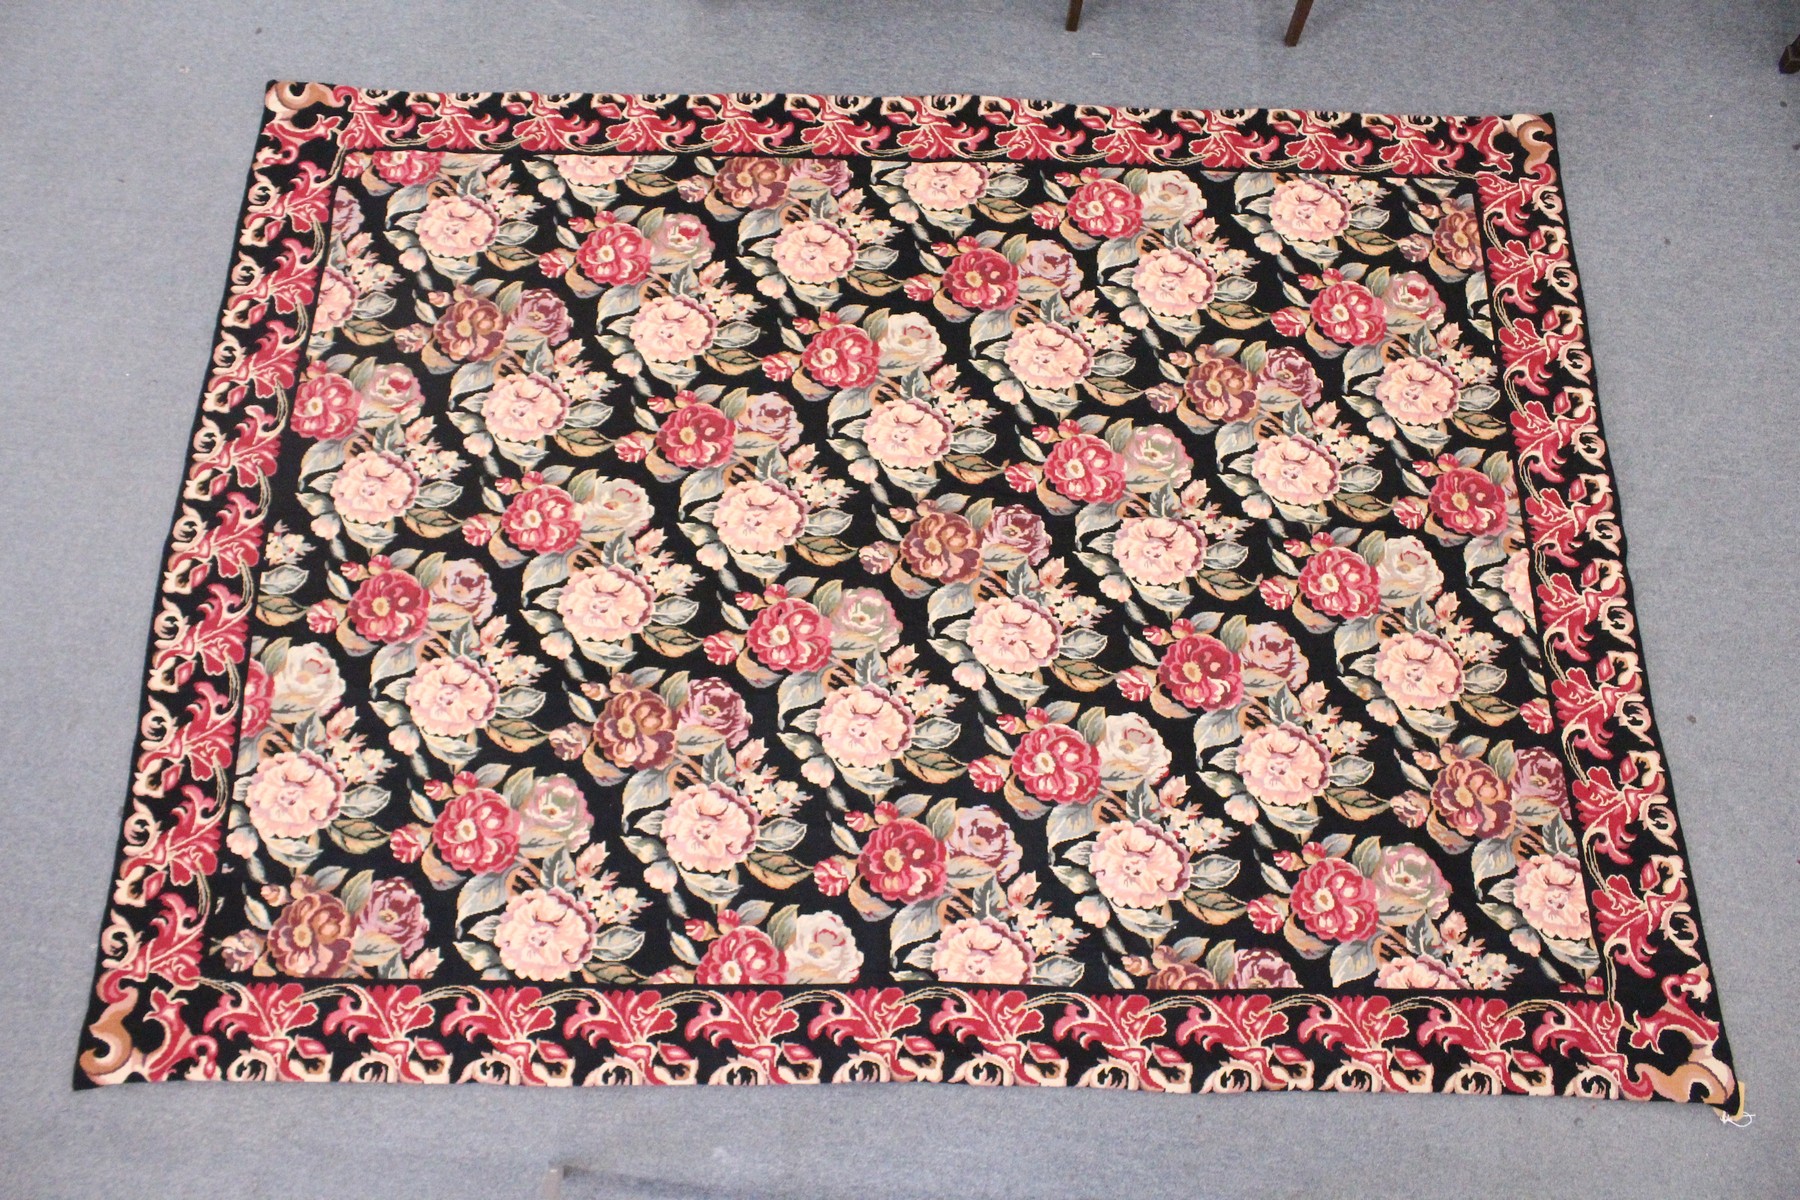 A LARGE AUBUSSON STYLE WOOLWORK TAPESTRY WALL HANGING, black ground with all-over floral decoration. - Image 8 of 8